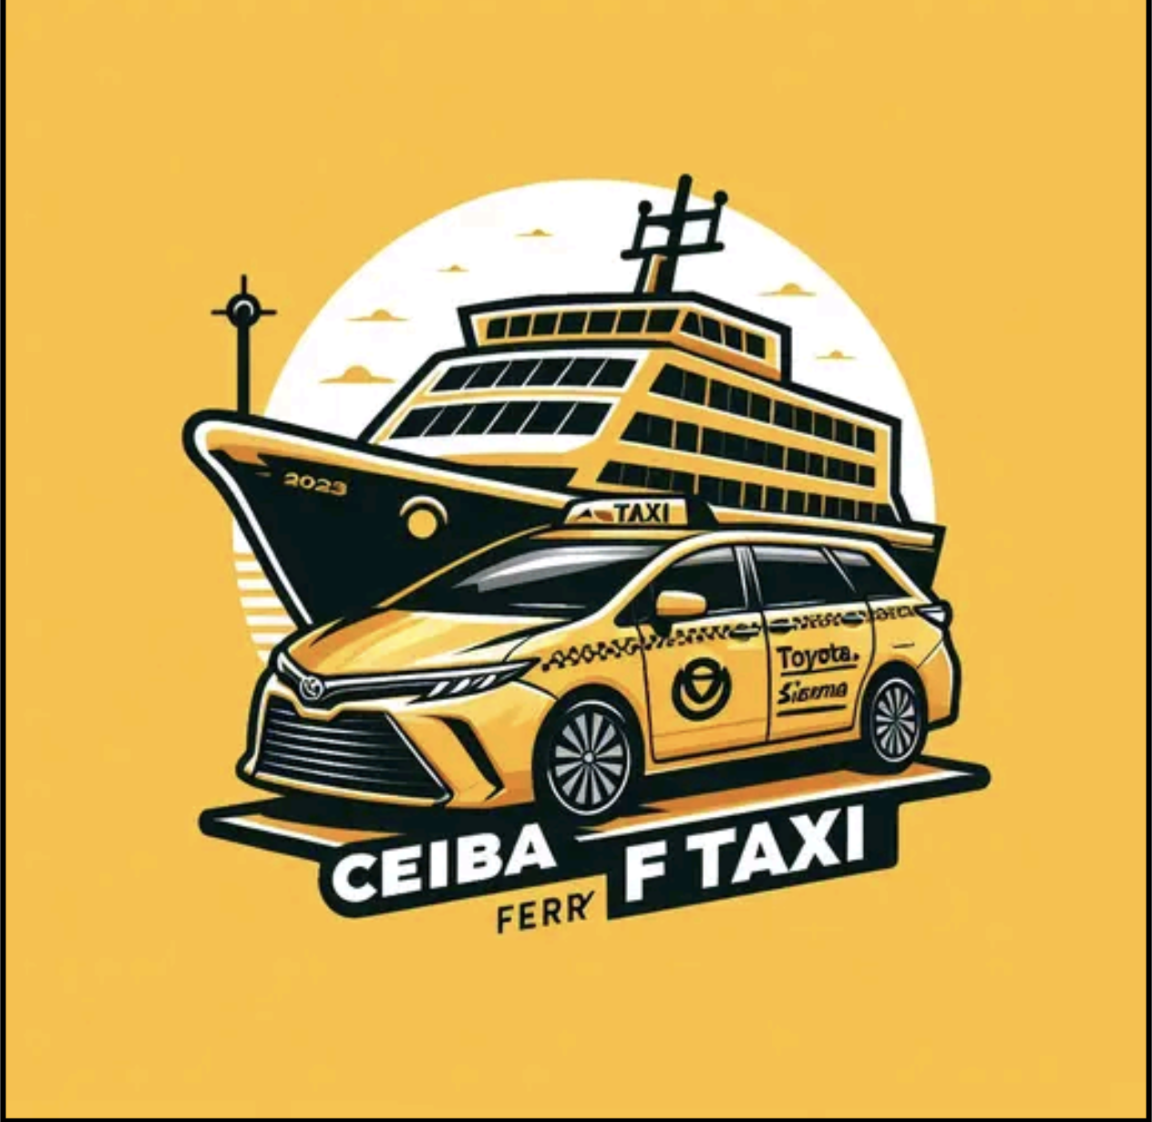 Ceiba Ferry and Airport Taxi